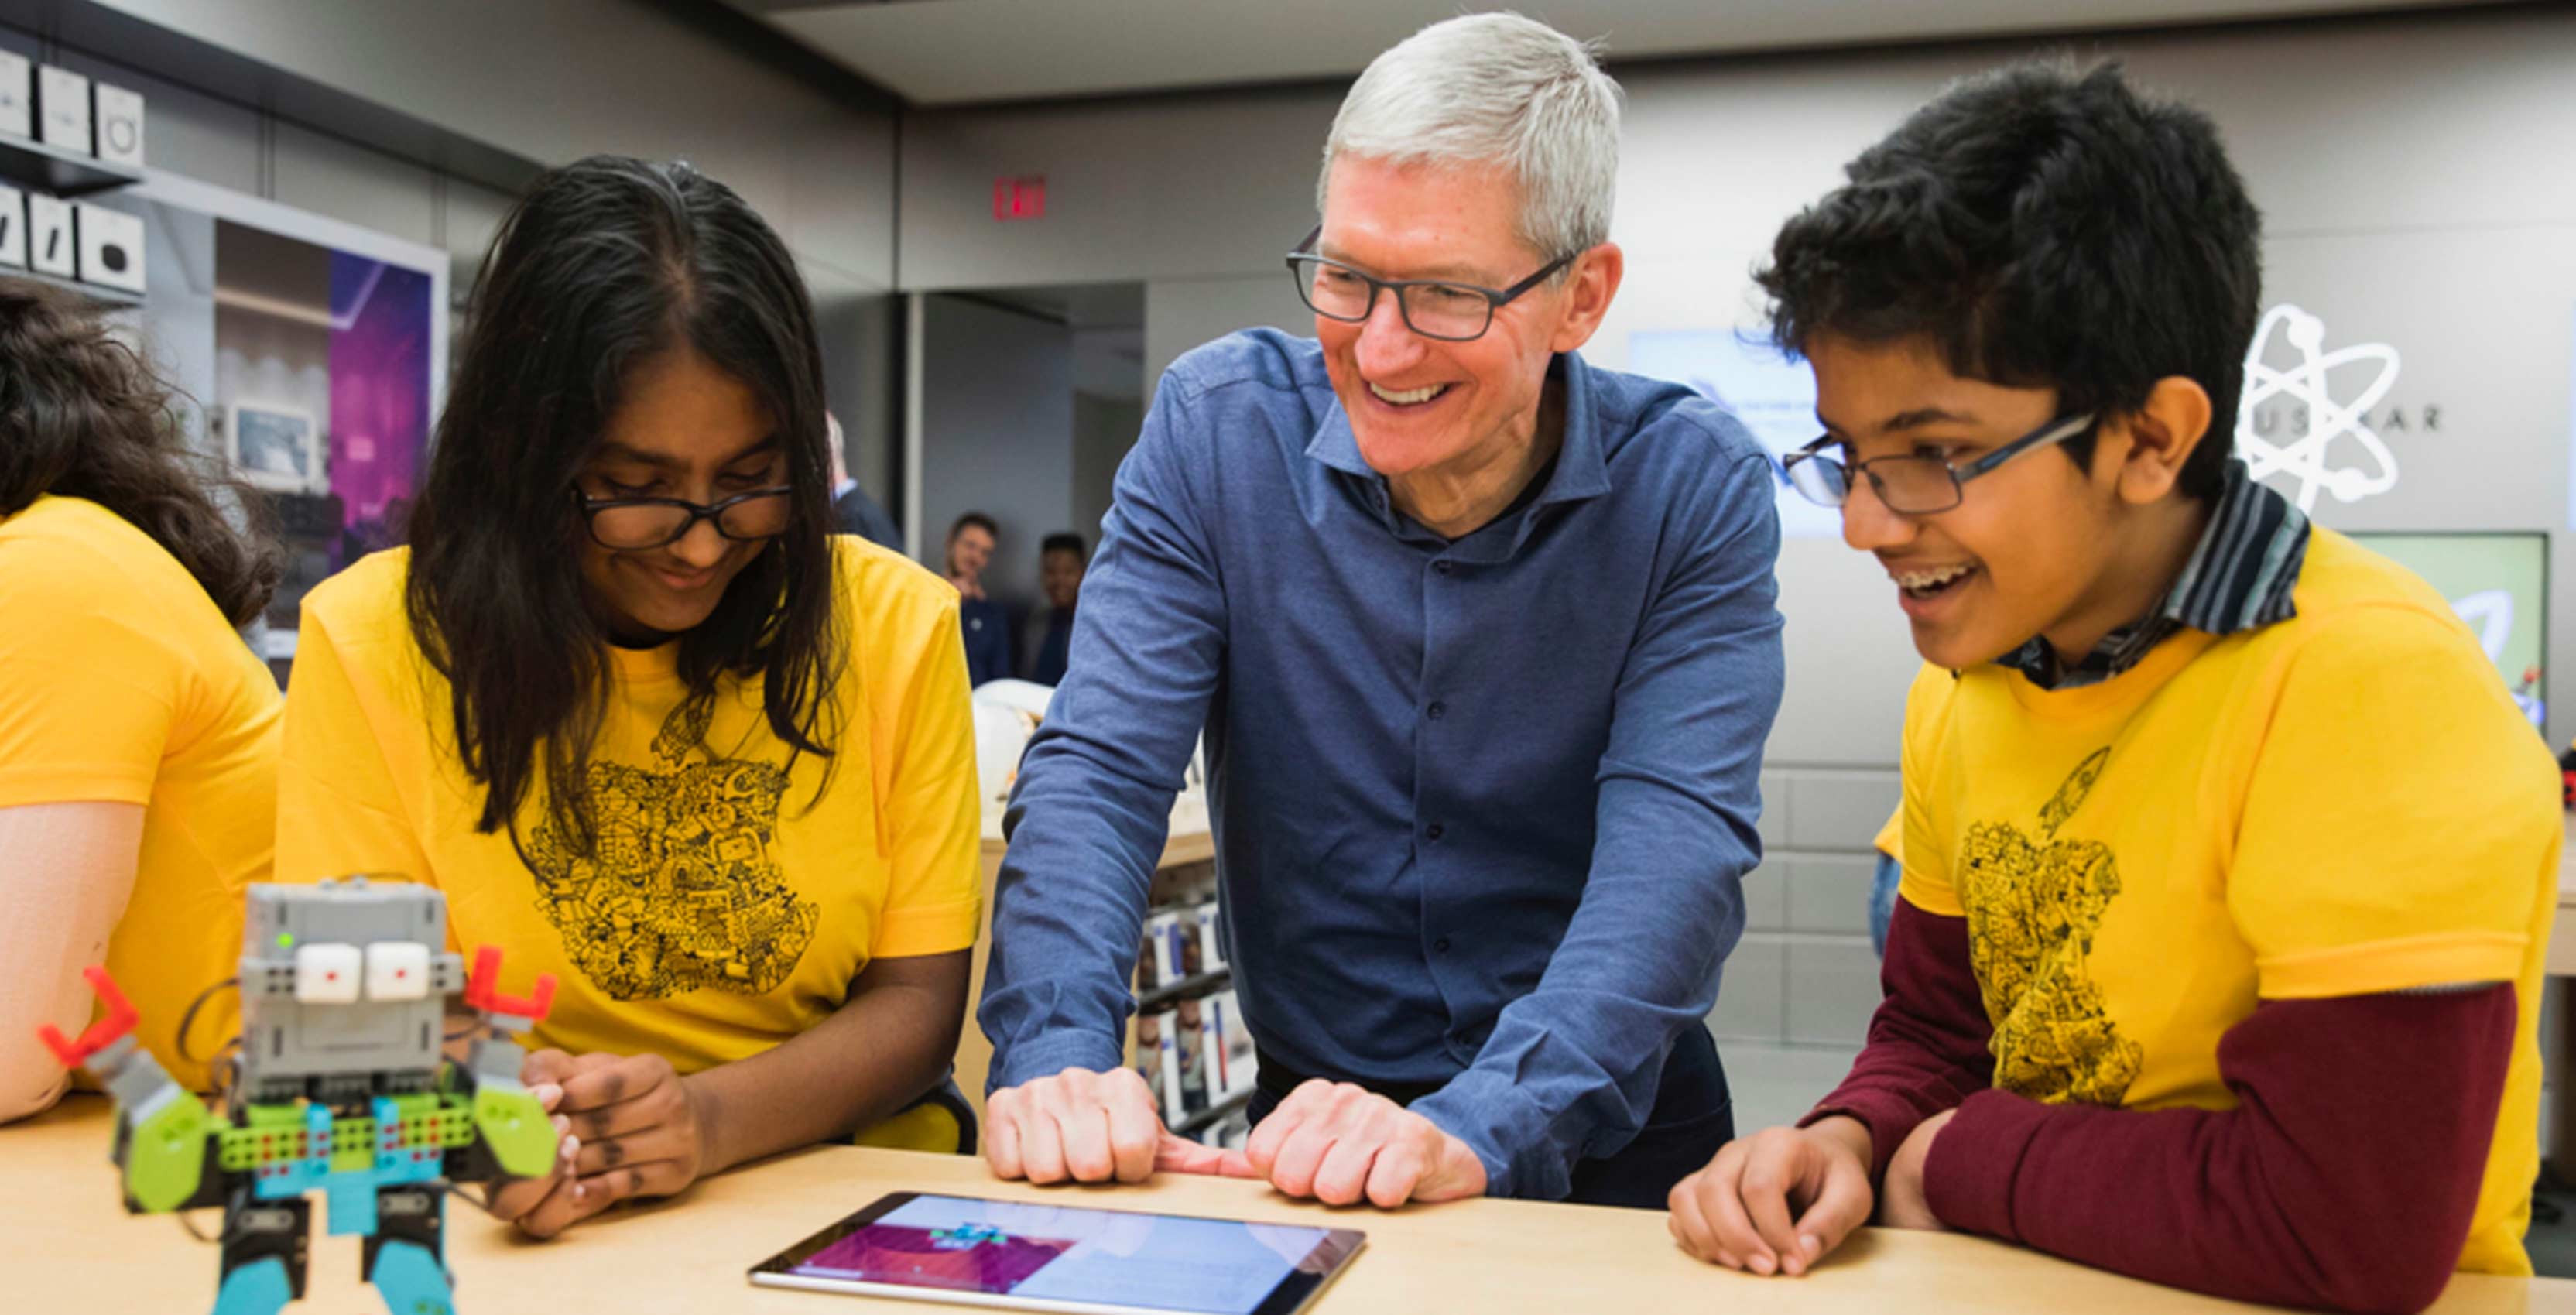 Tim Cook visited Toronto's Eaton Centre Apple Store